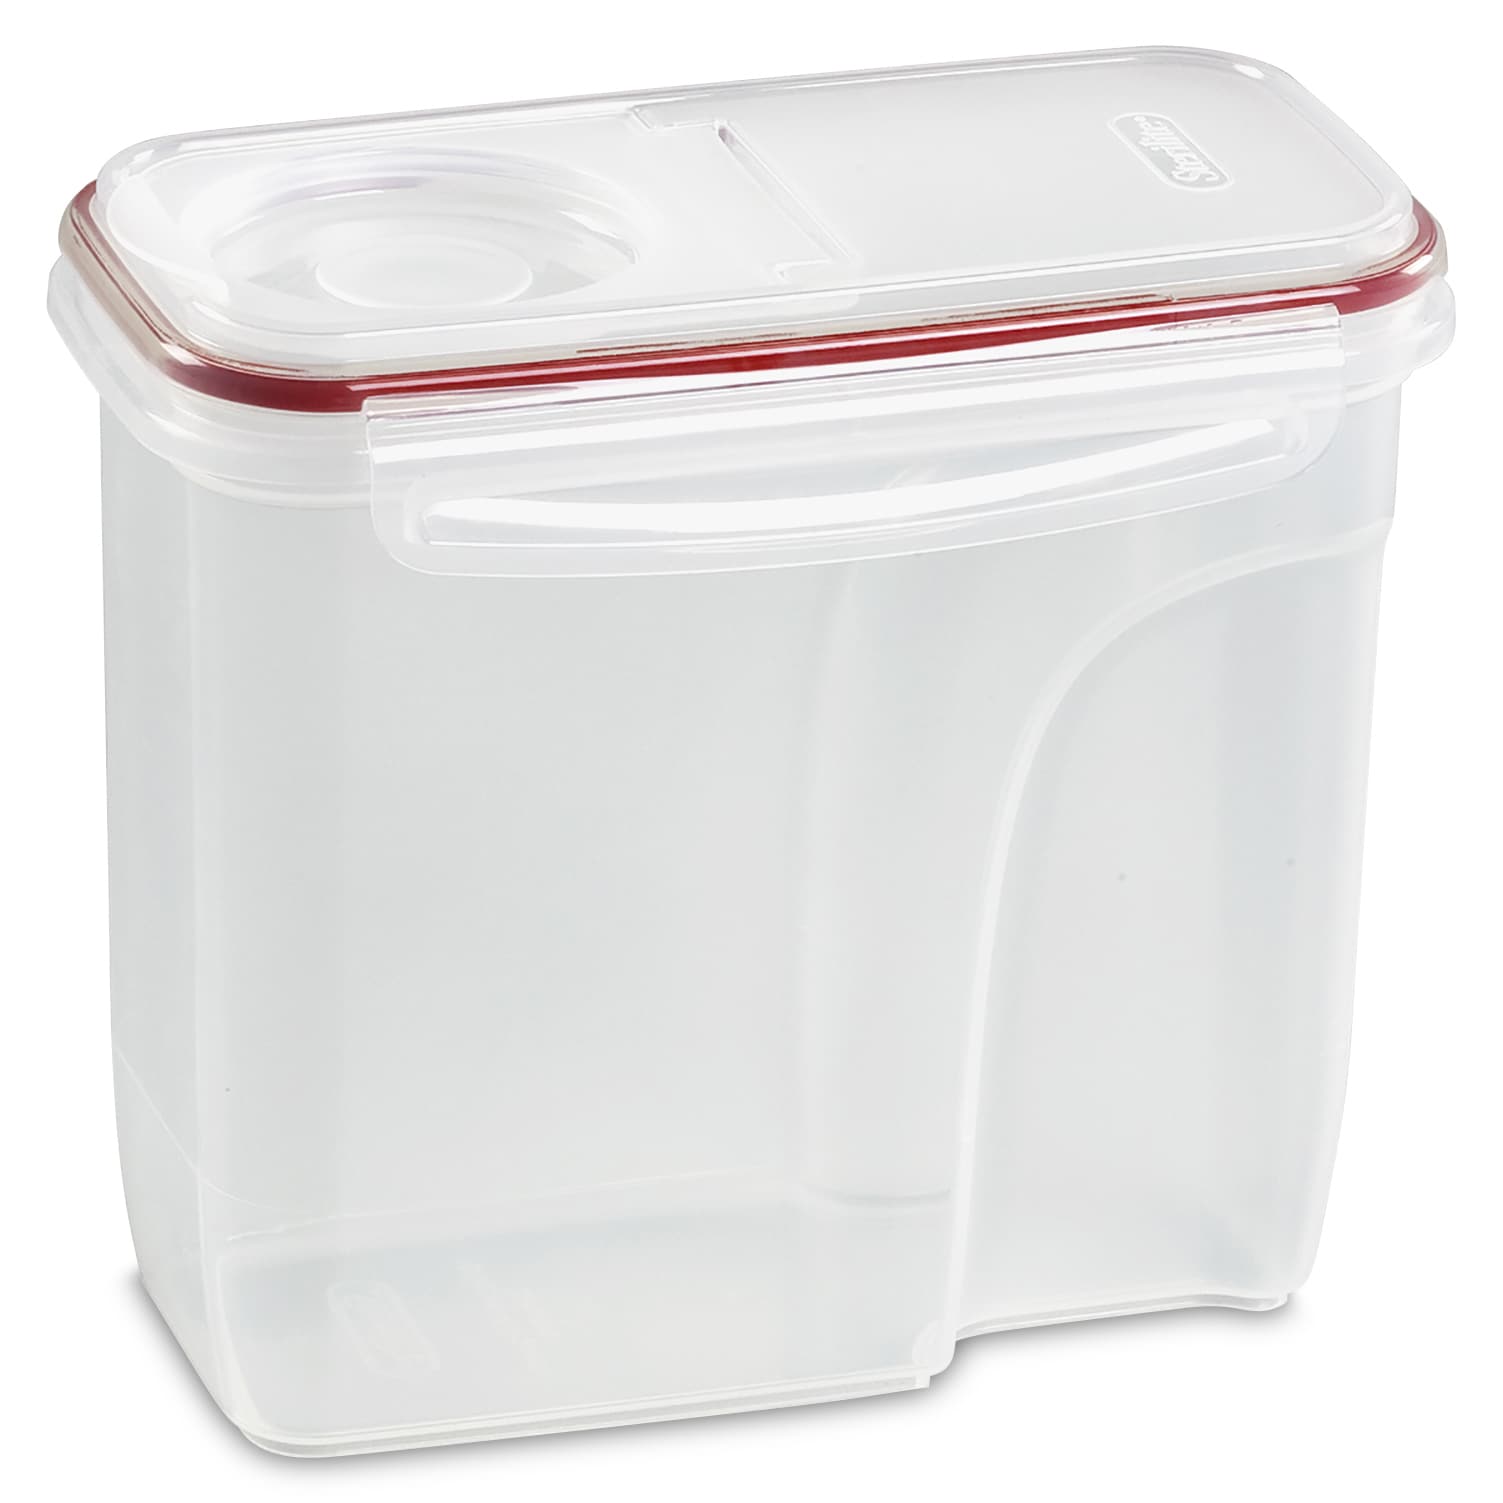 Sterilite 03166606 16 Cup Clear UltraSeal Food Container - Bed